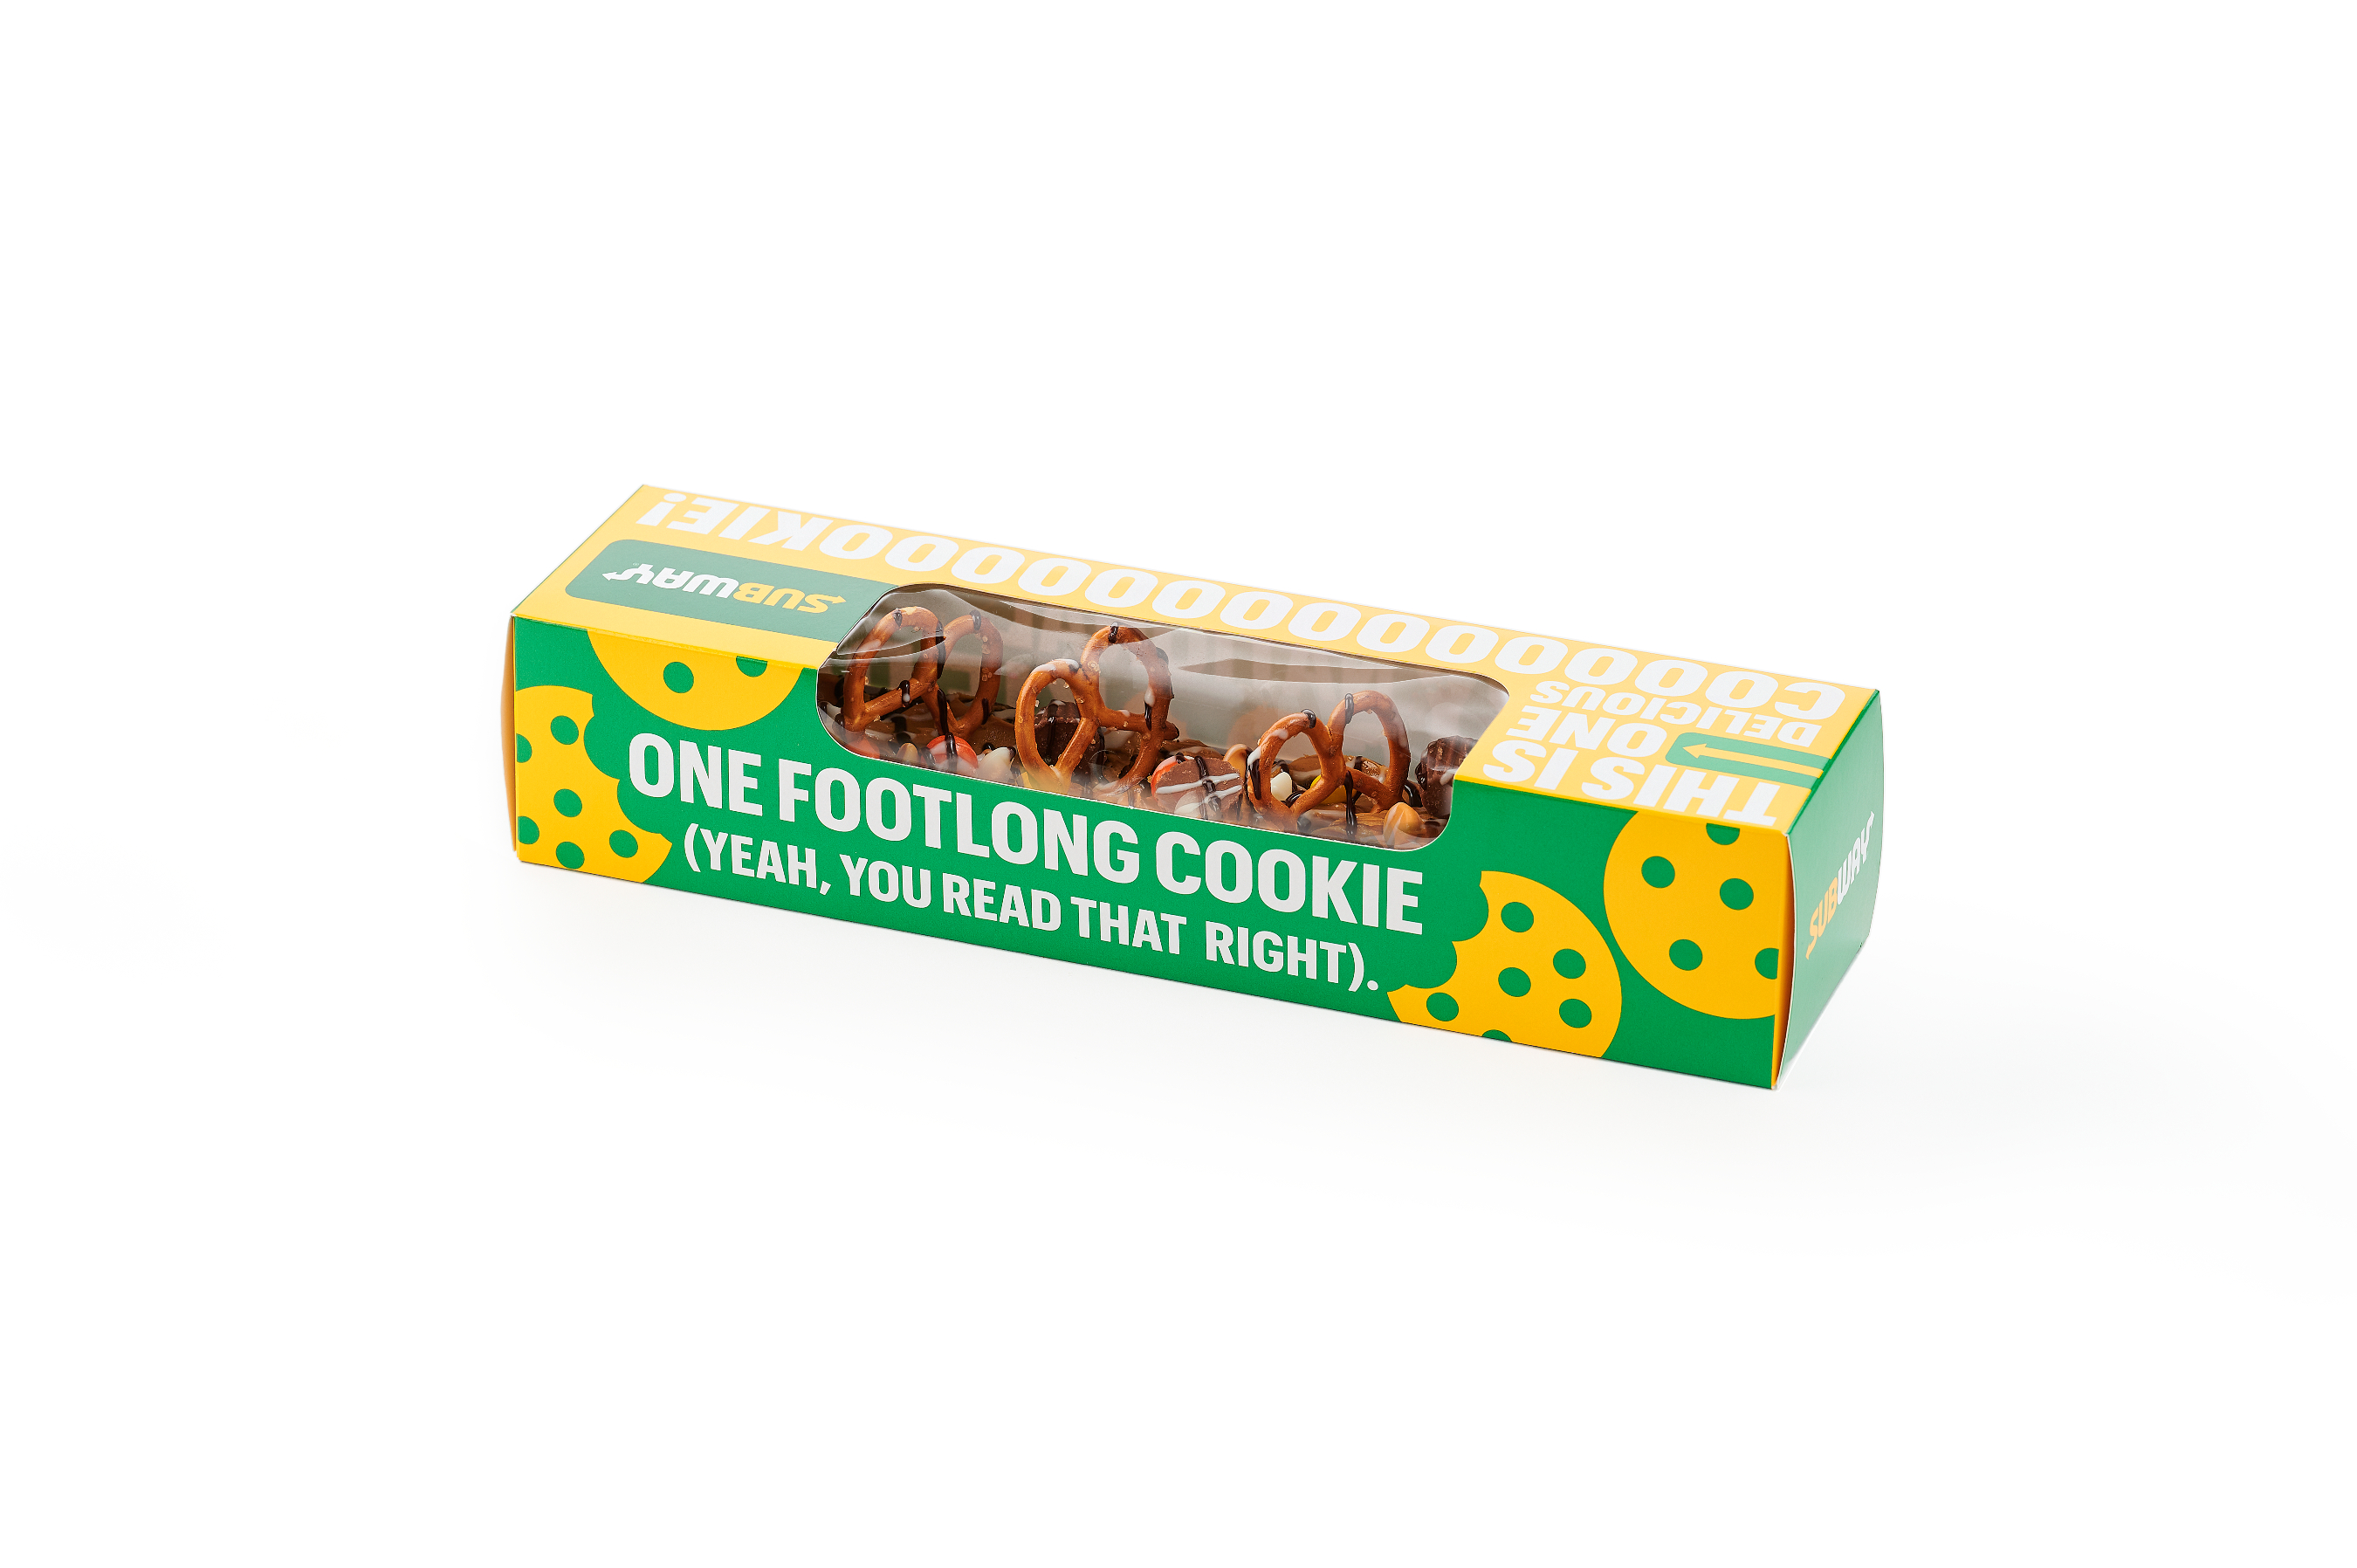 Cookie lovers can taste one of Subway’s footlong flavors exclusively at Cookieway, the brand’s pop-up restaurant that only serves its fan-favorite cookies.